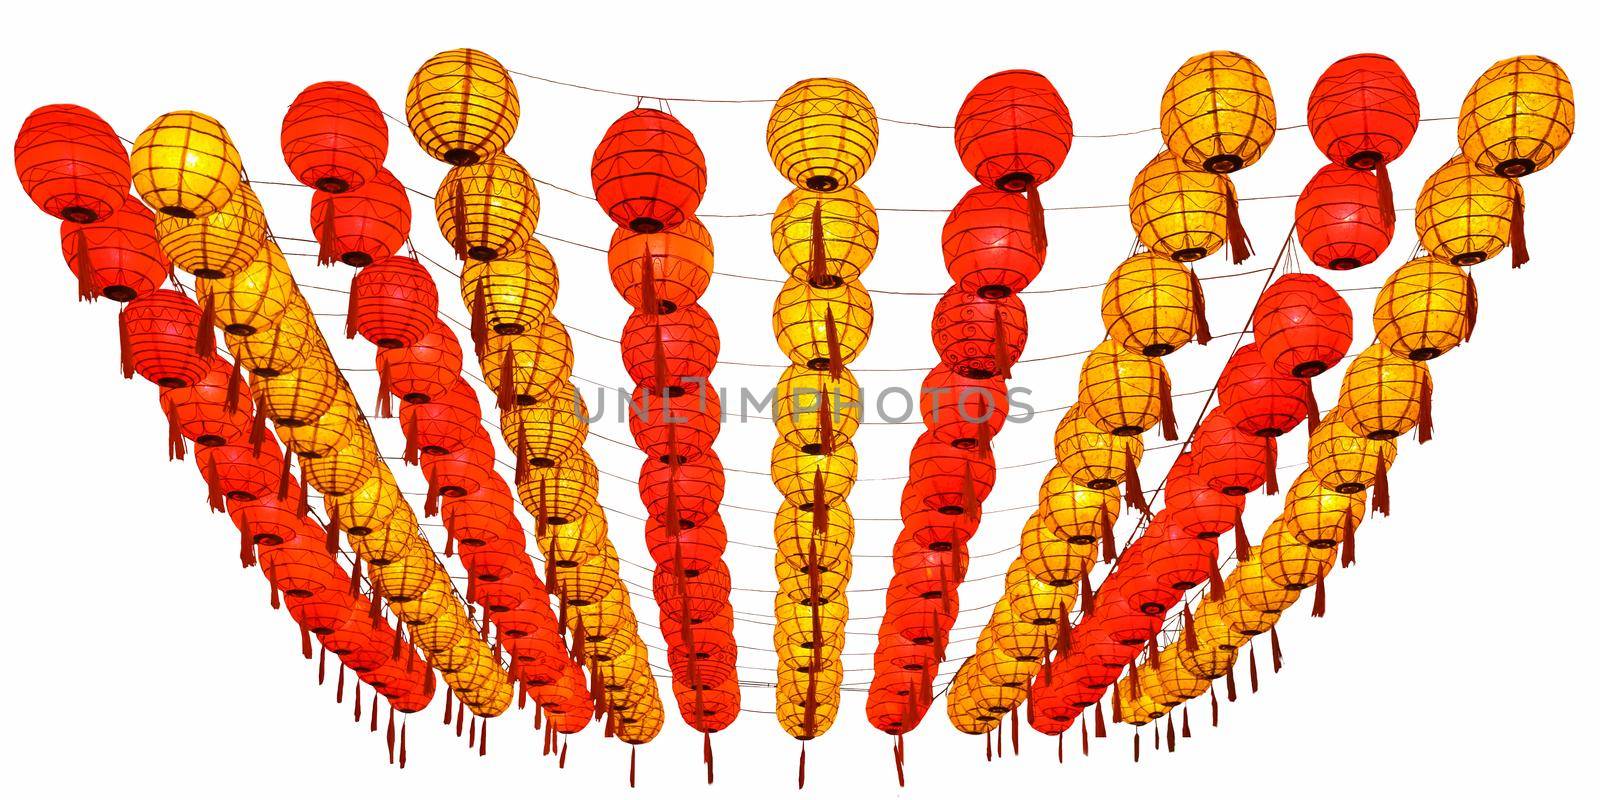 Chinese new year lanterns for celebration on white background.
 by toa55